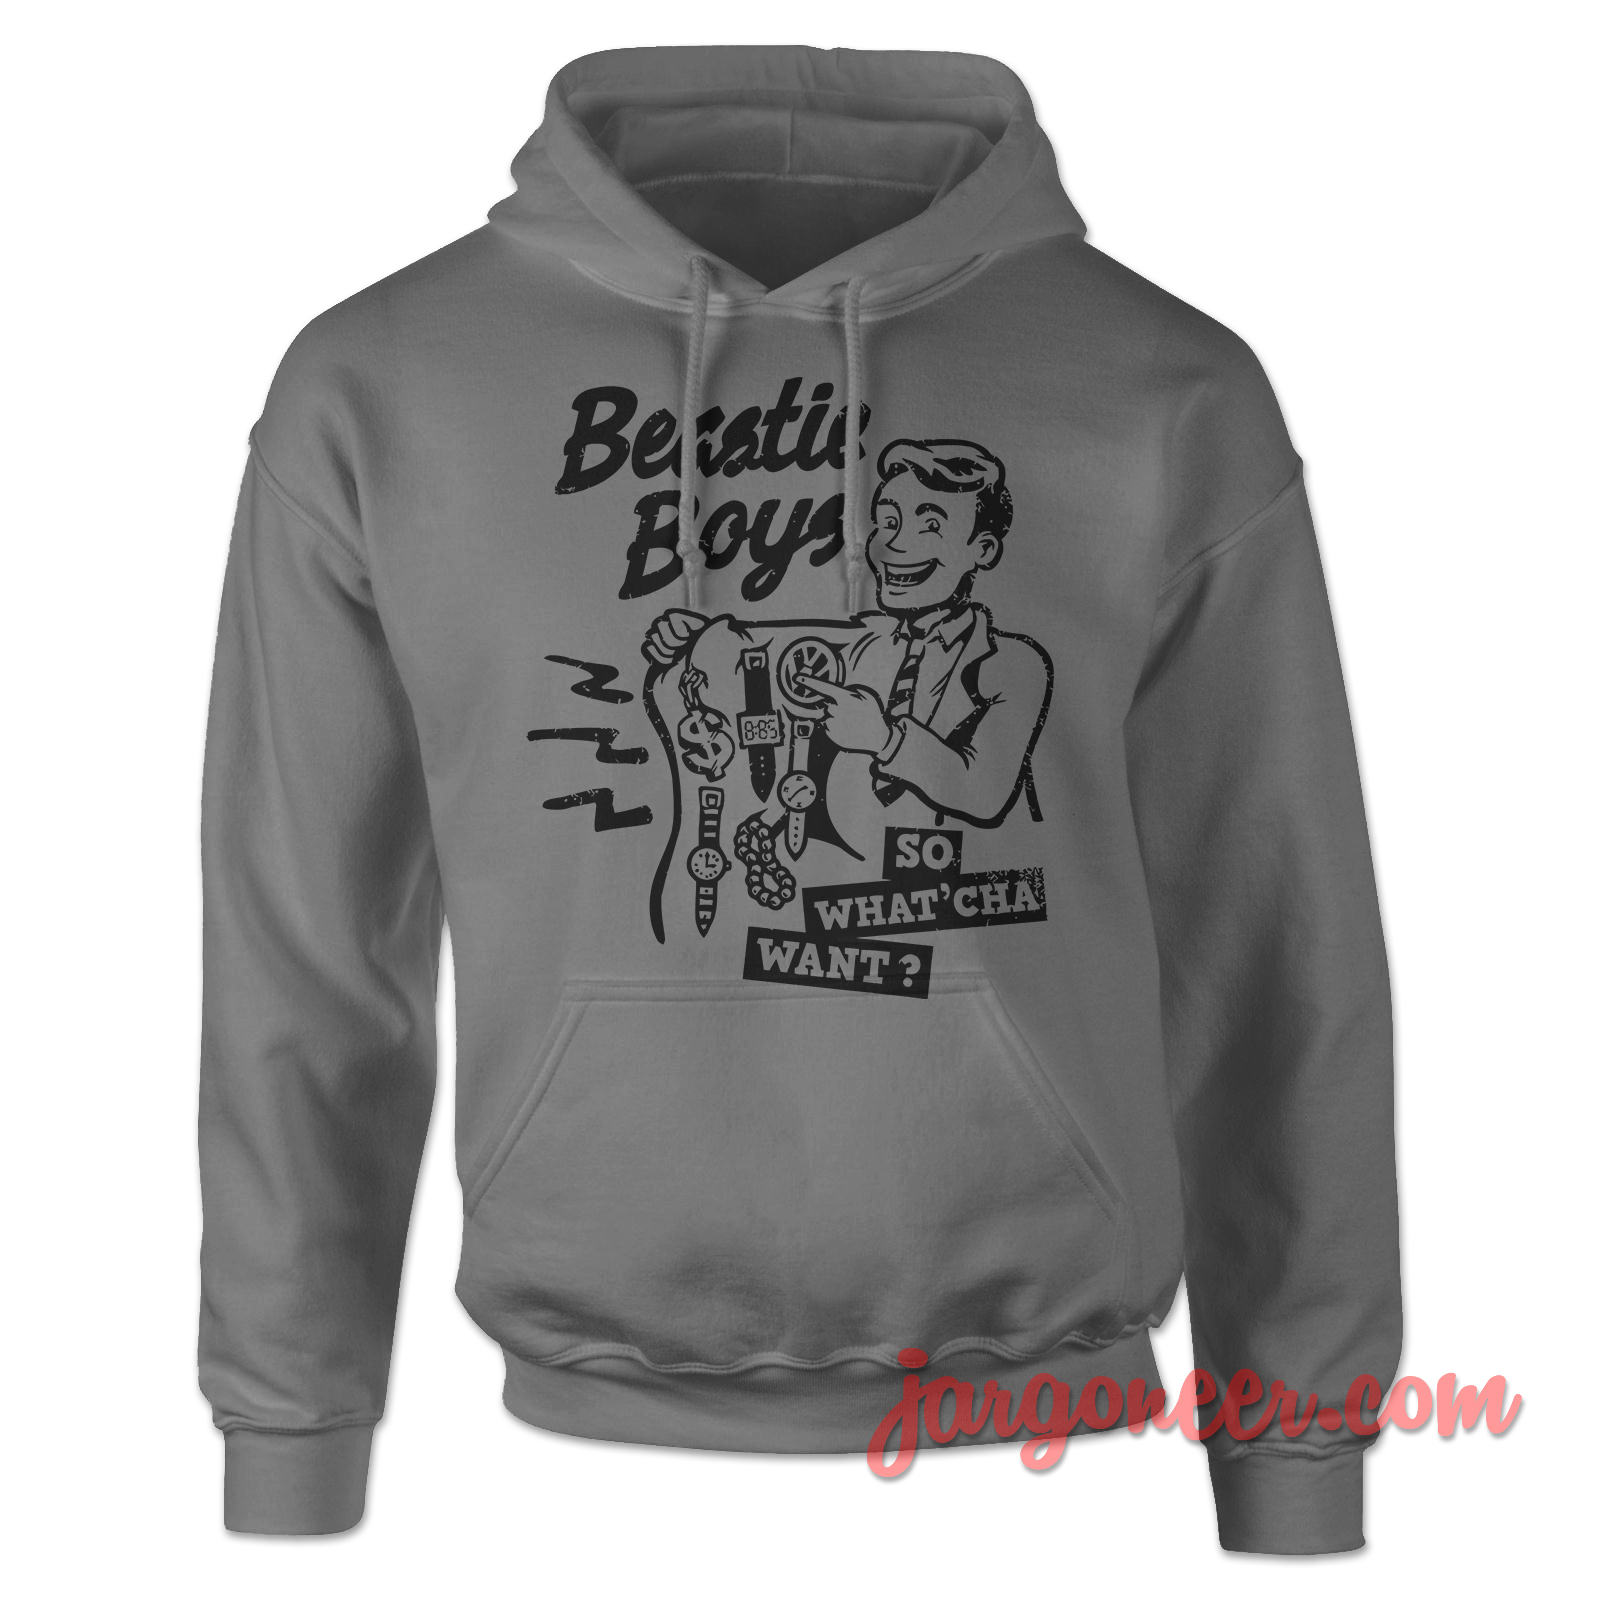 Beastie Boys So What Cha Want Gray Hoody - Shop Unique Graphic Cool Shirt Designs